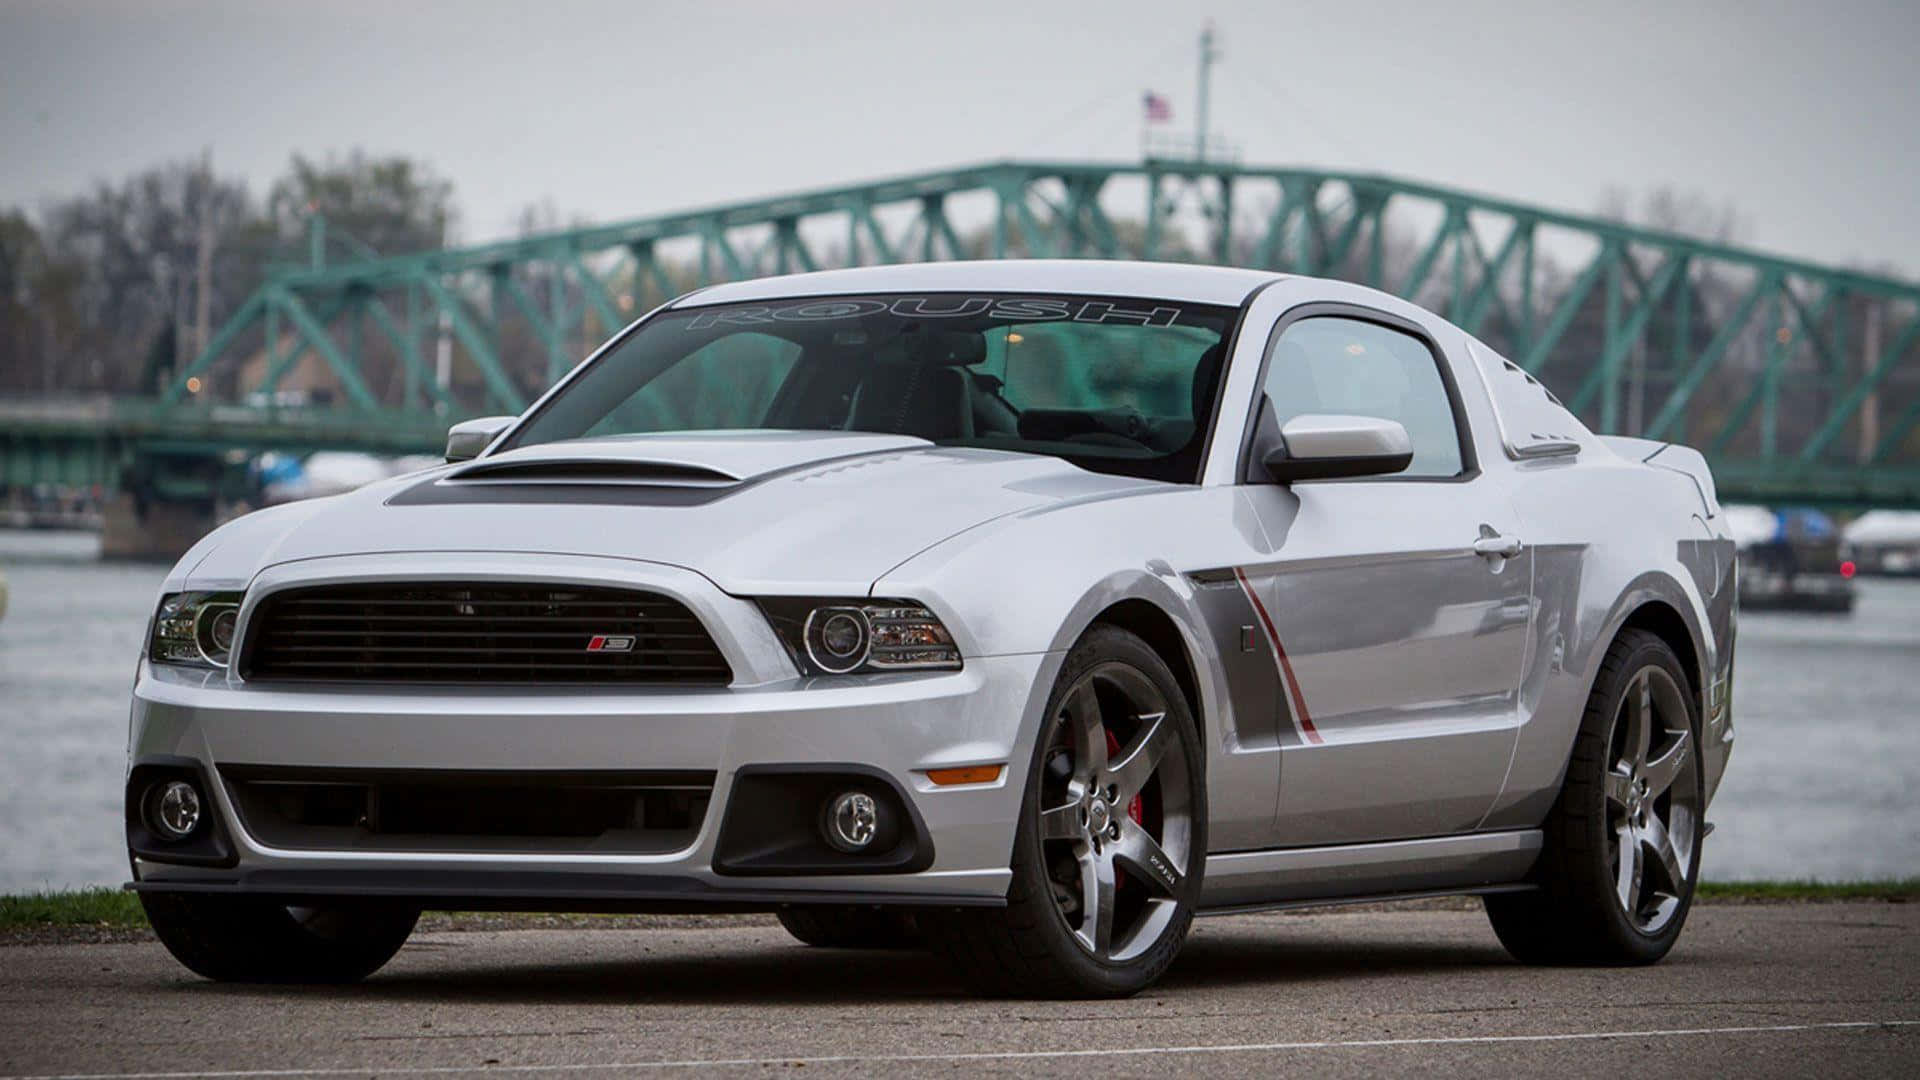 Sleek and Powerful Ford Mustang Roush on the Move Wallpaper